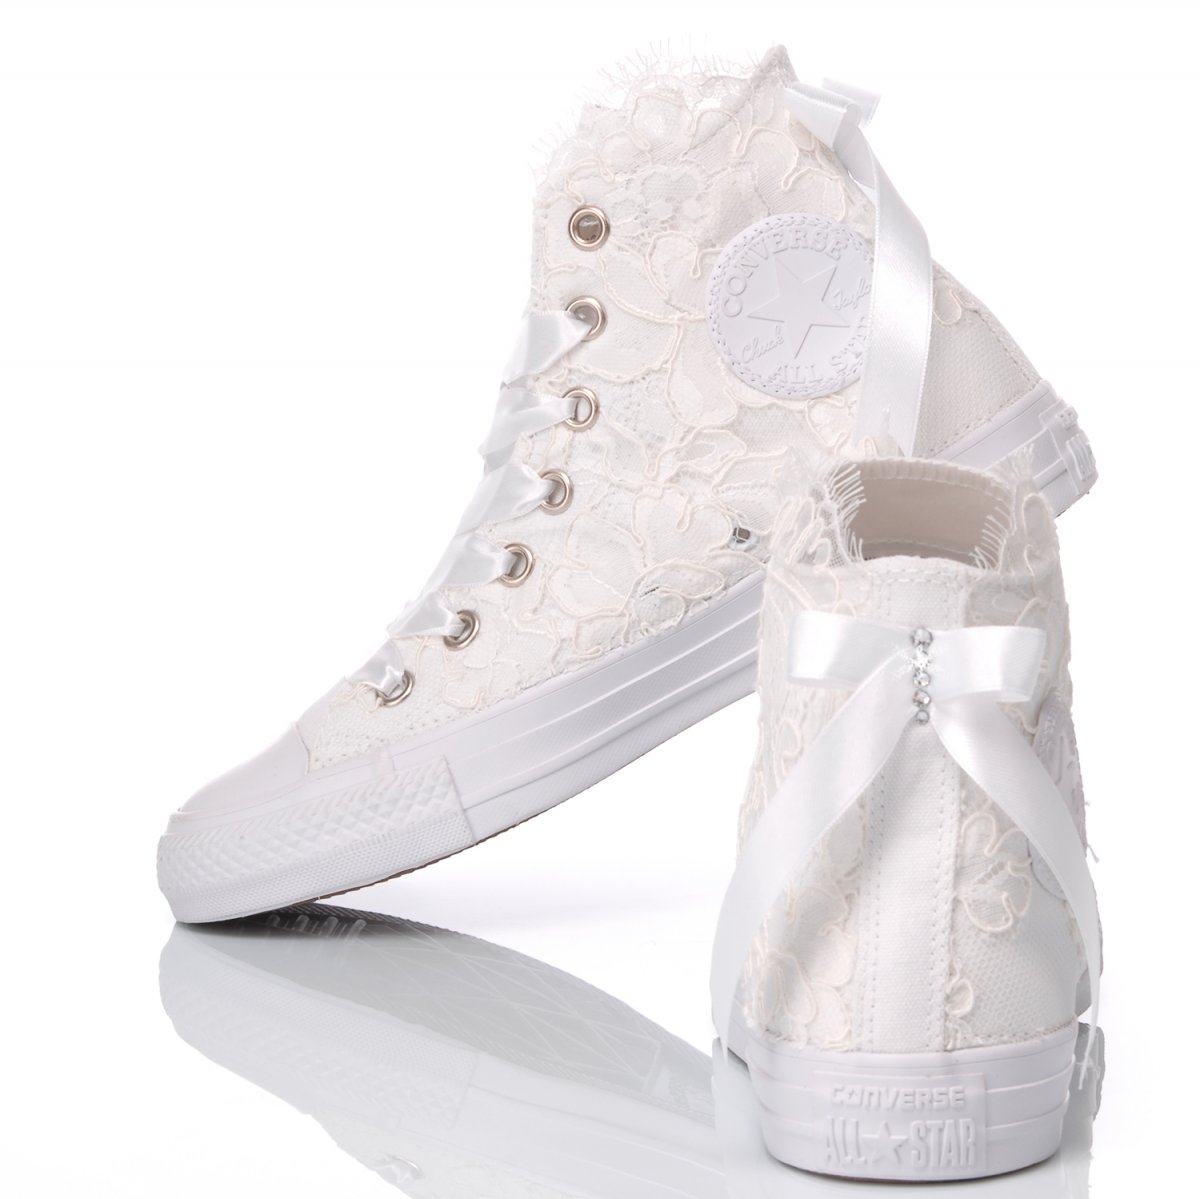 converse bianche pizzo francese